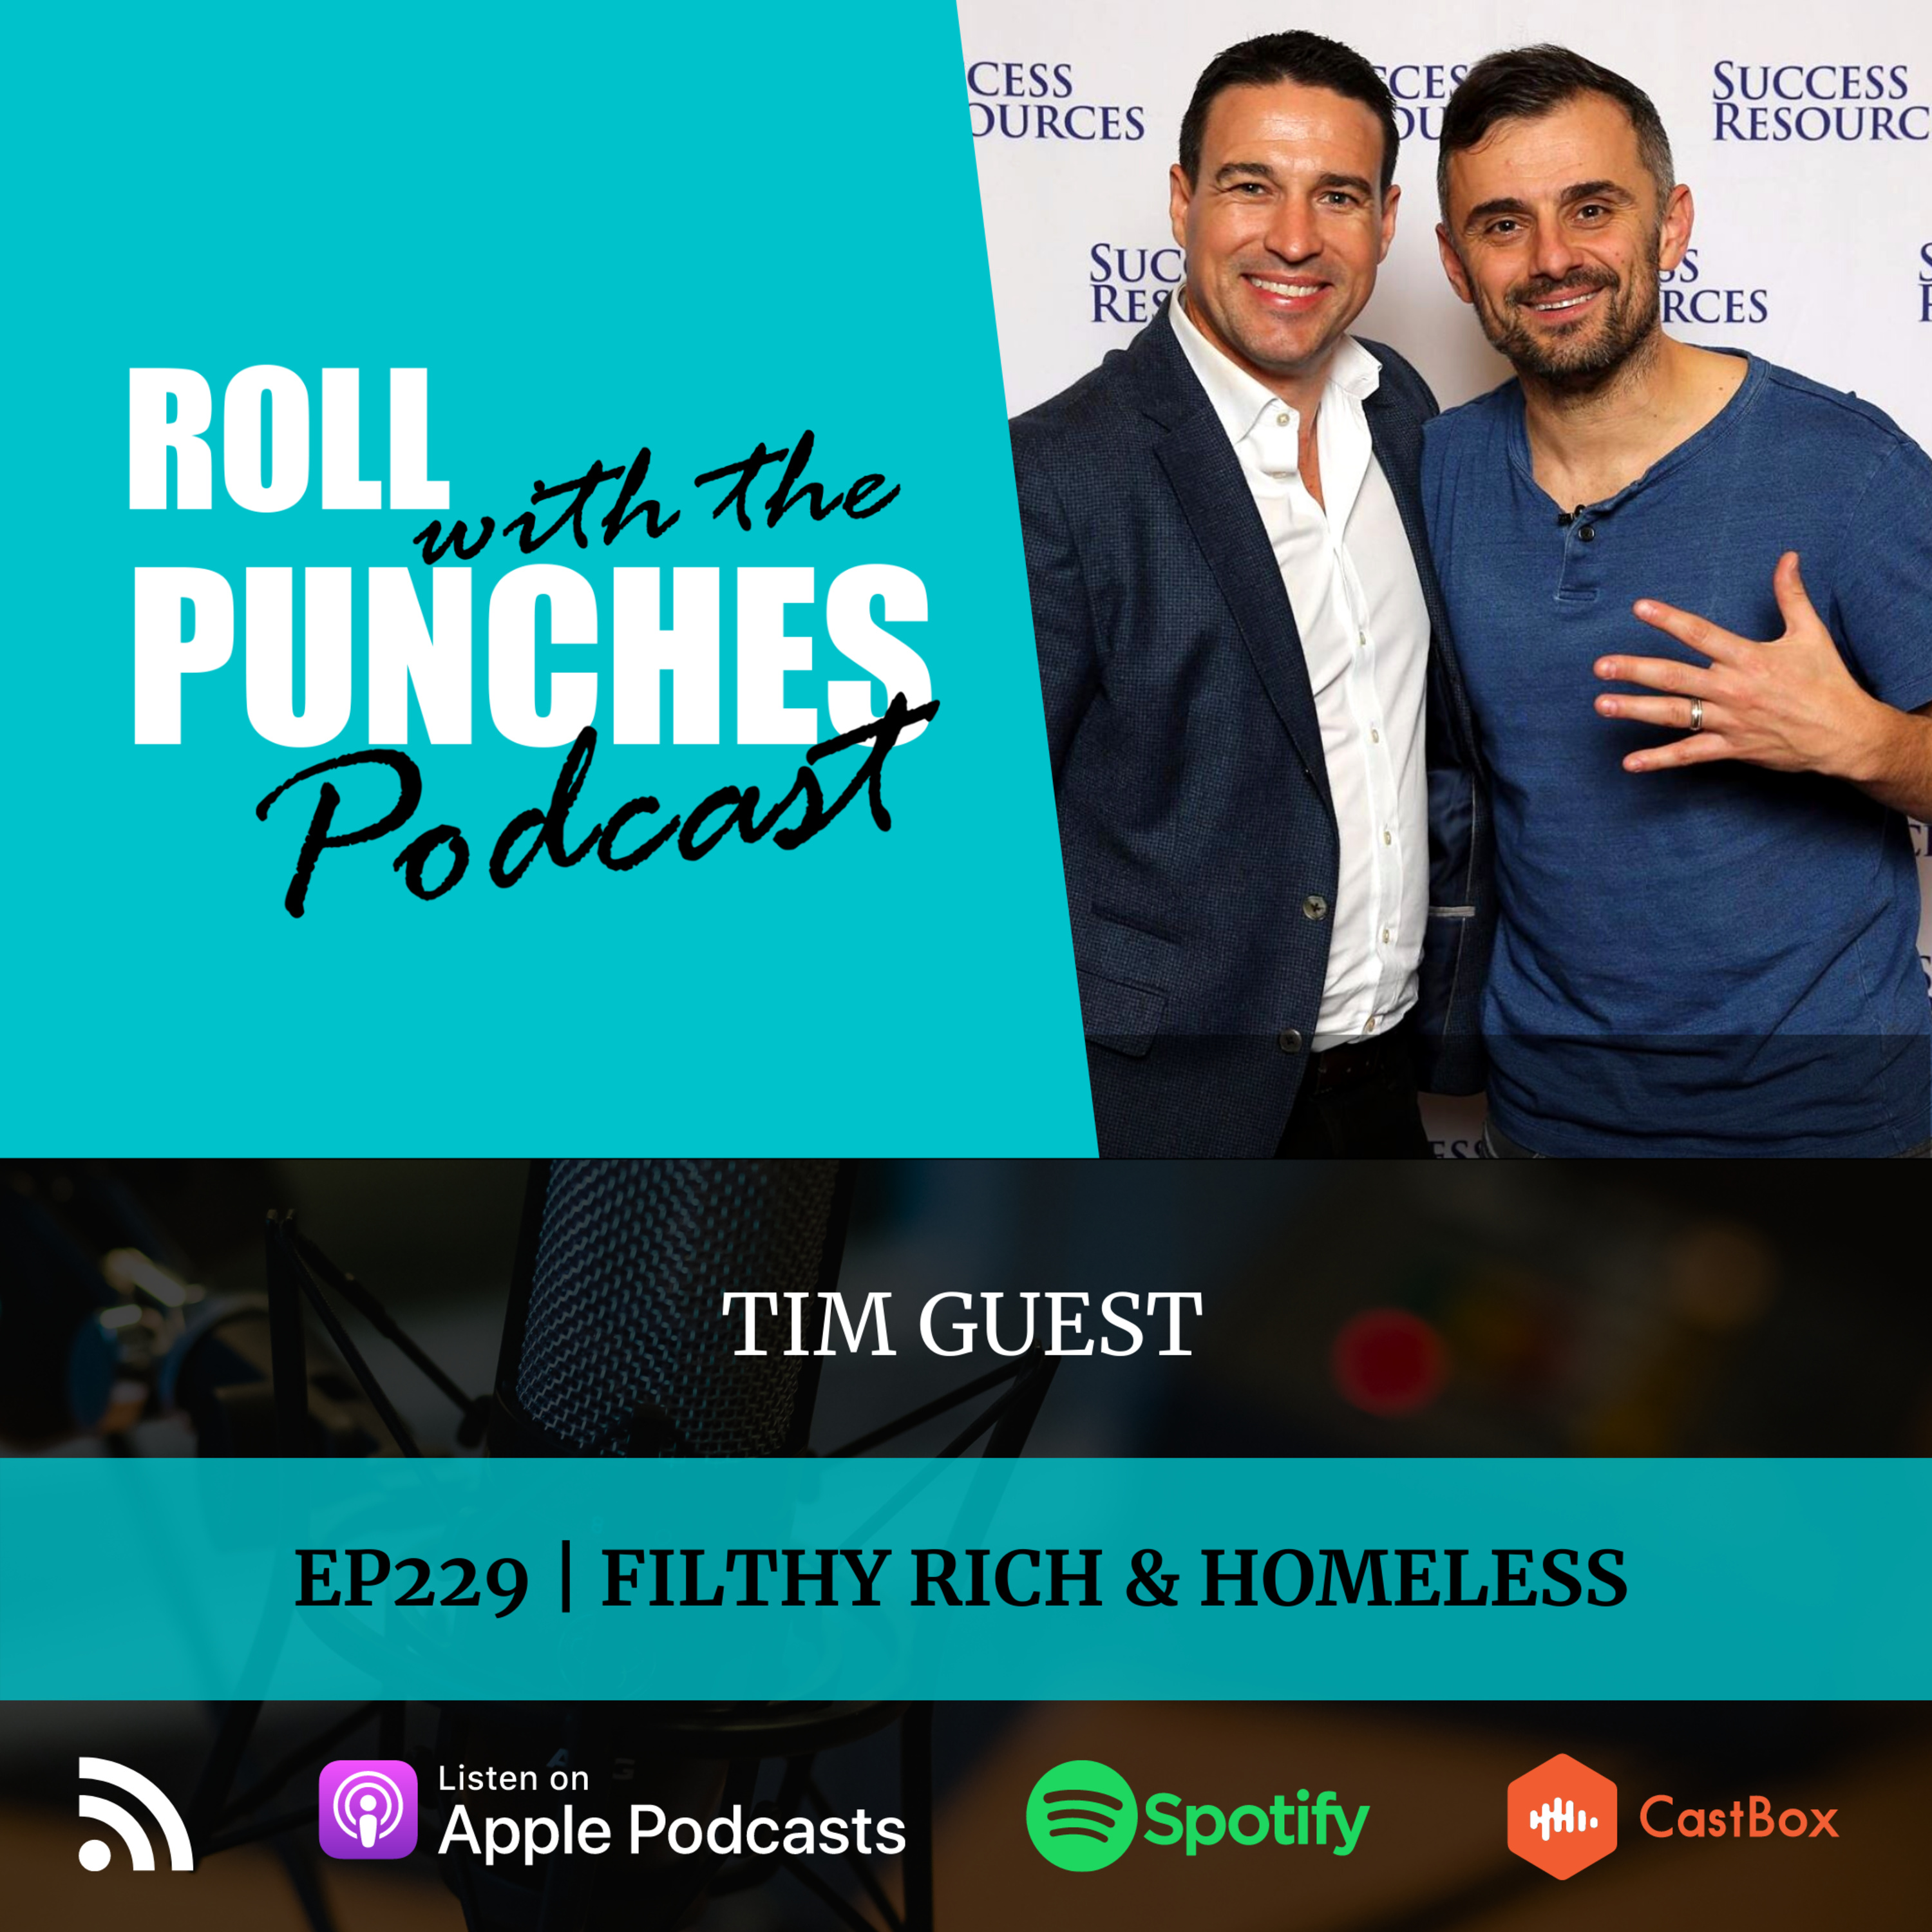 EP229 Filthy Rich & Homeless | Tim Guest